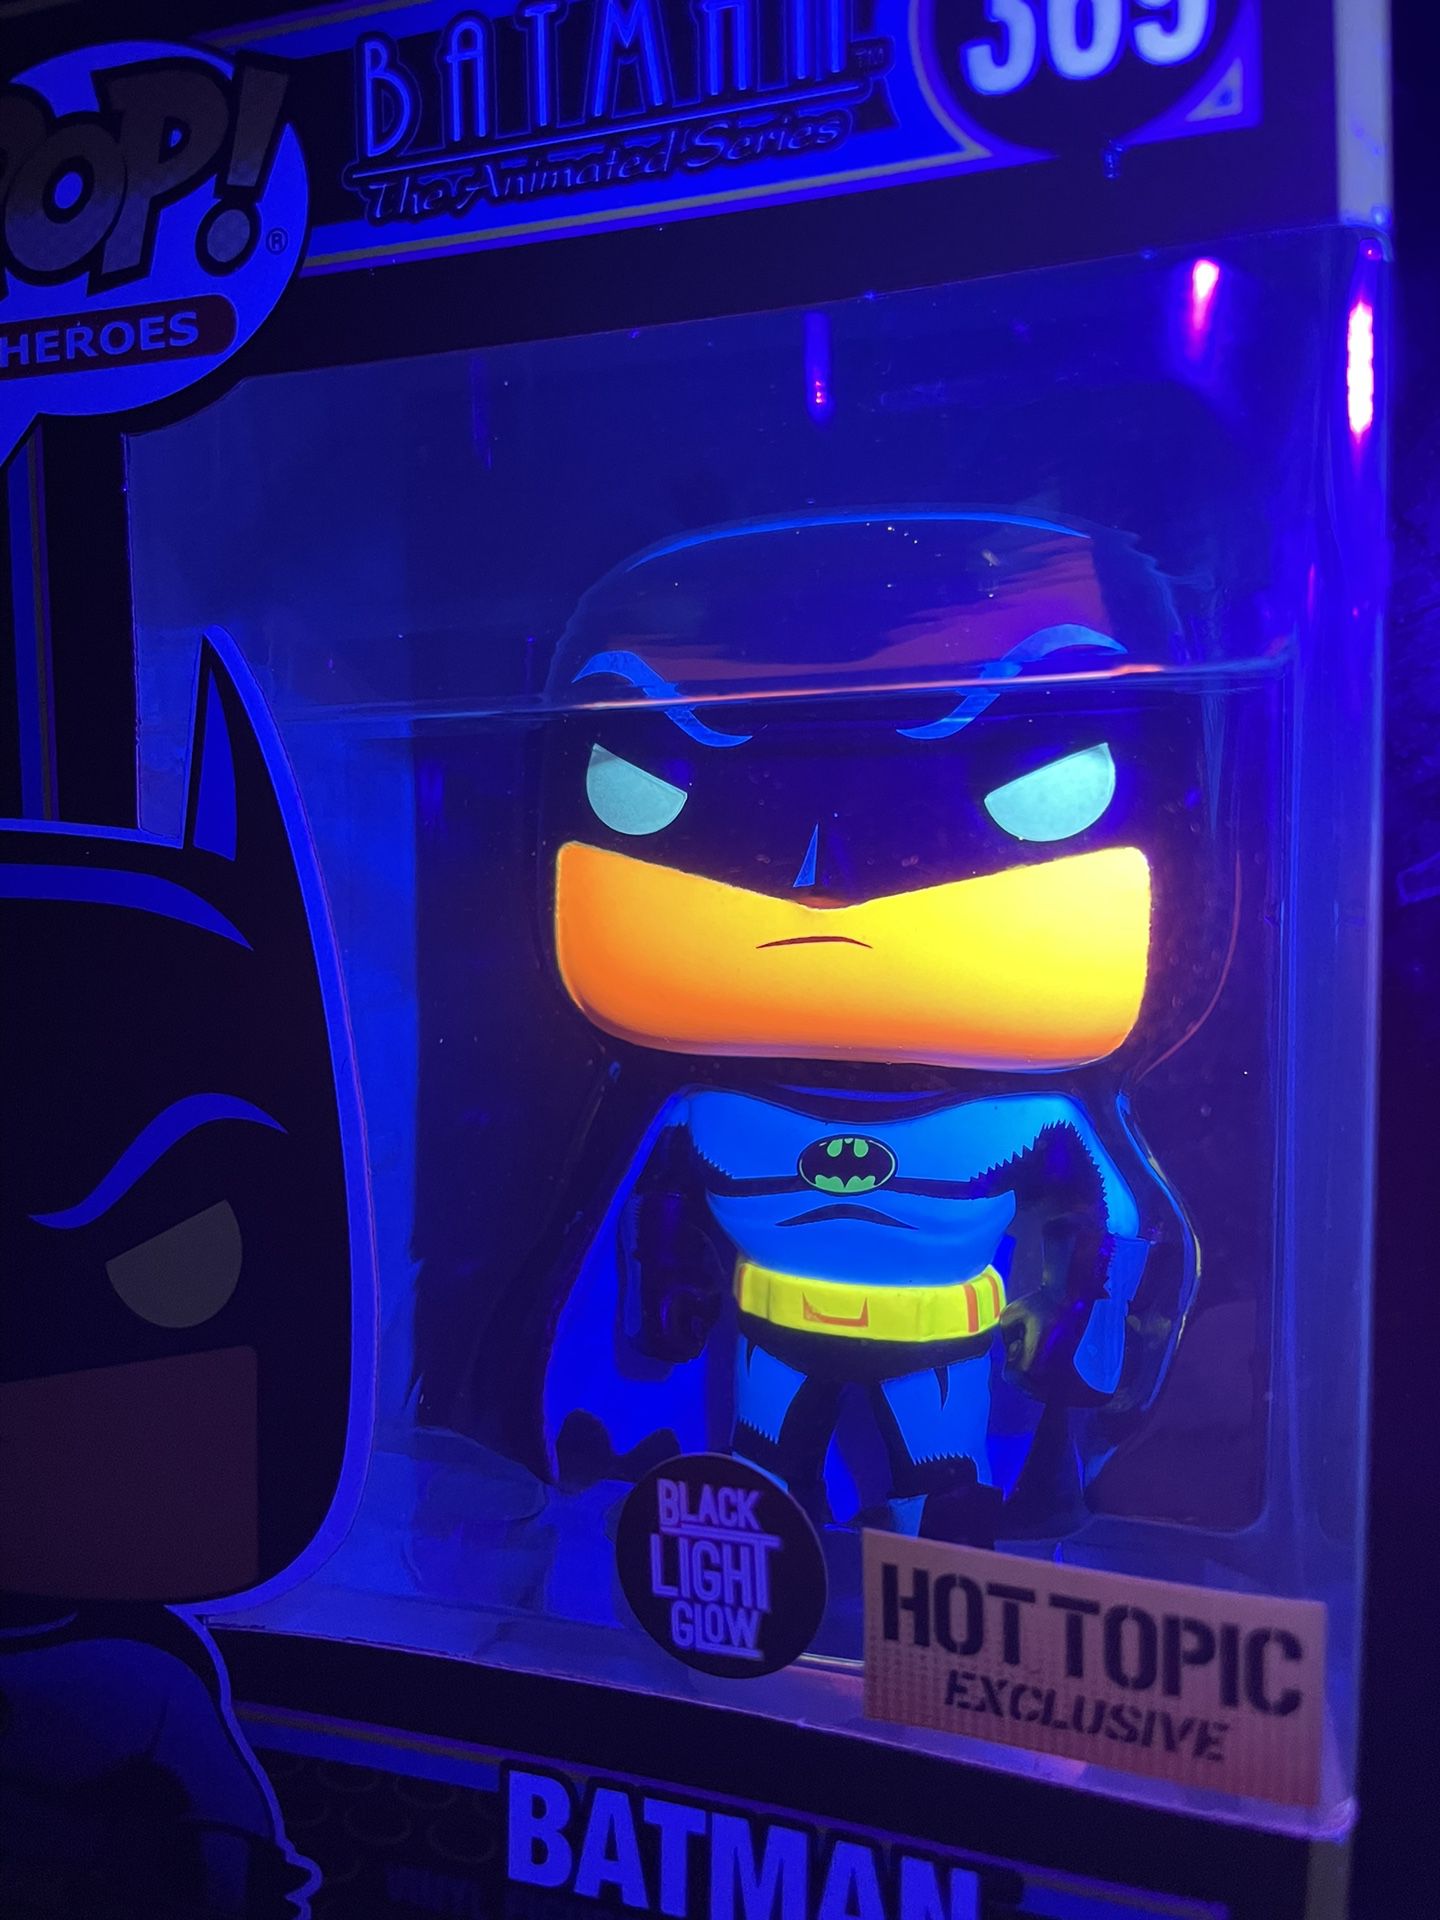 Black Light Batman Funko Pop *MINT* Hot Topic Exclusive Animated Series BtAS DC Heroes 369 with protector